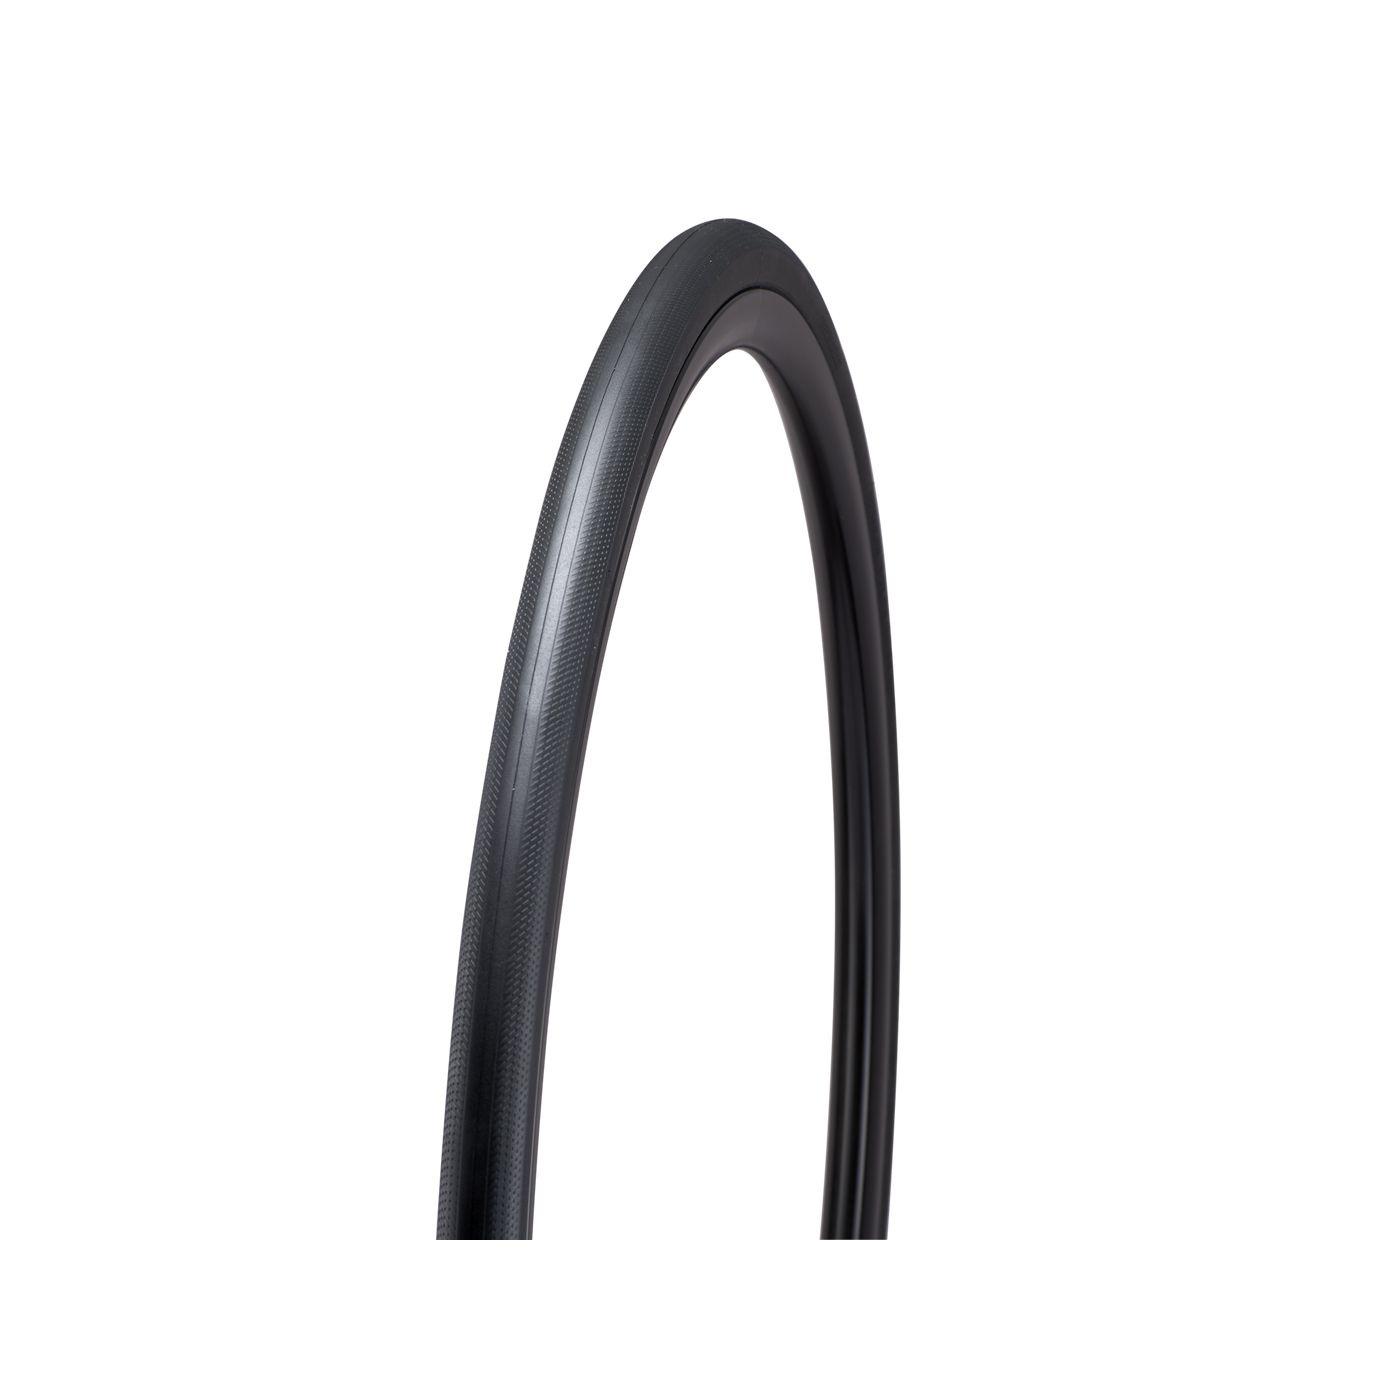 Specialized Turbo Pro T5 700c Road Bike Tire - Tires - Bicycle Warehouse